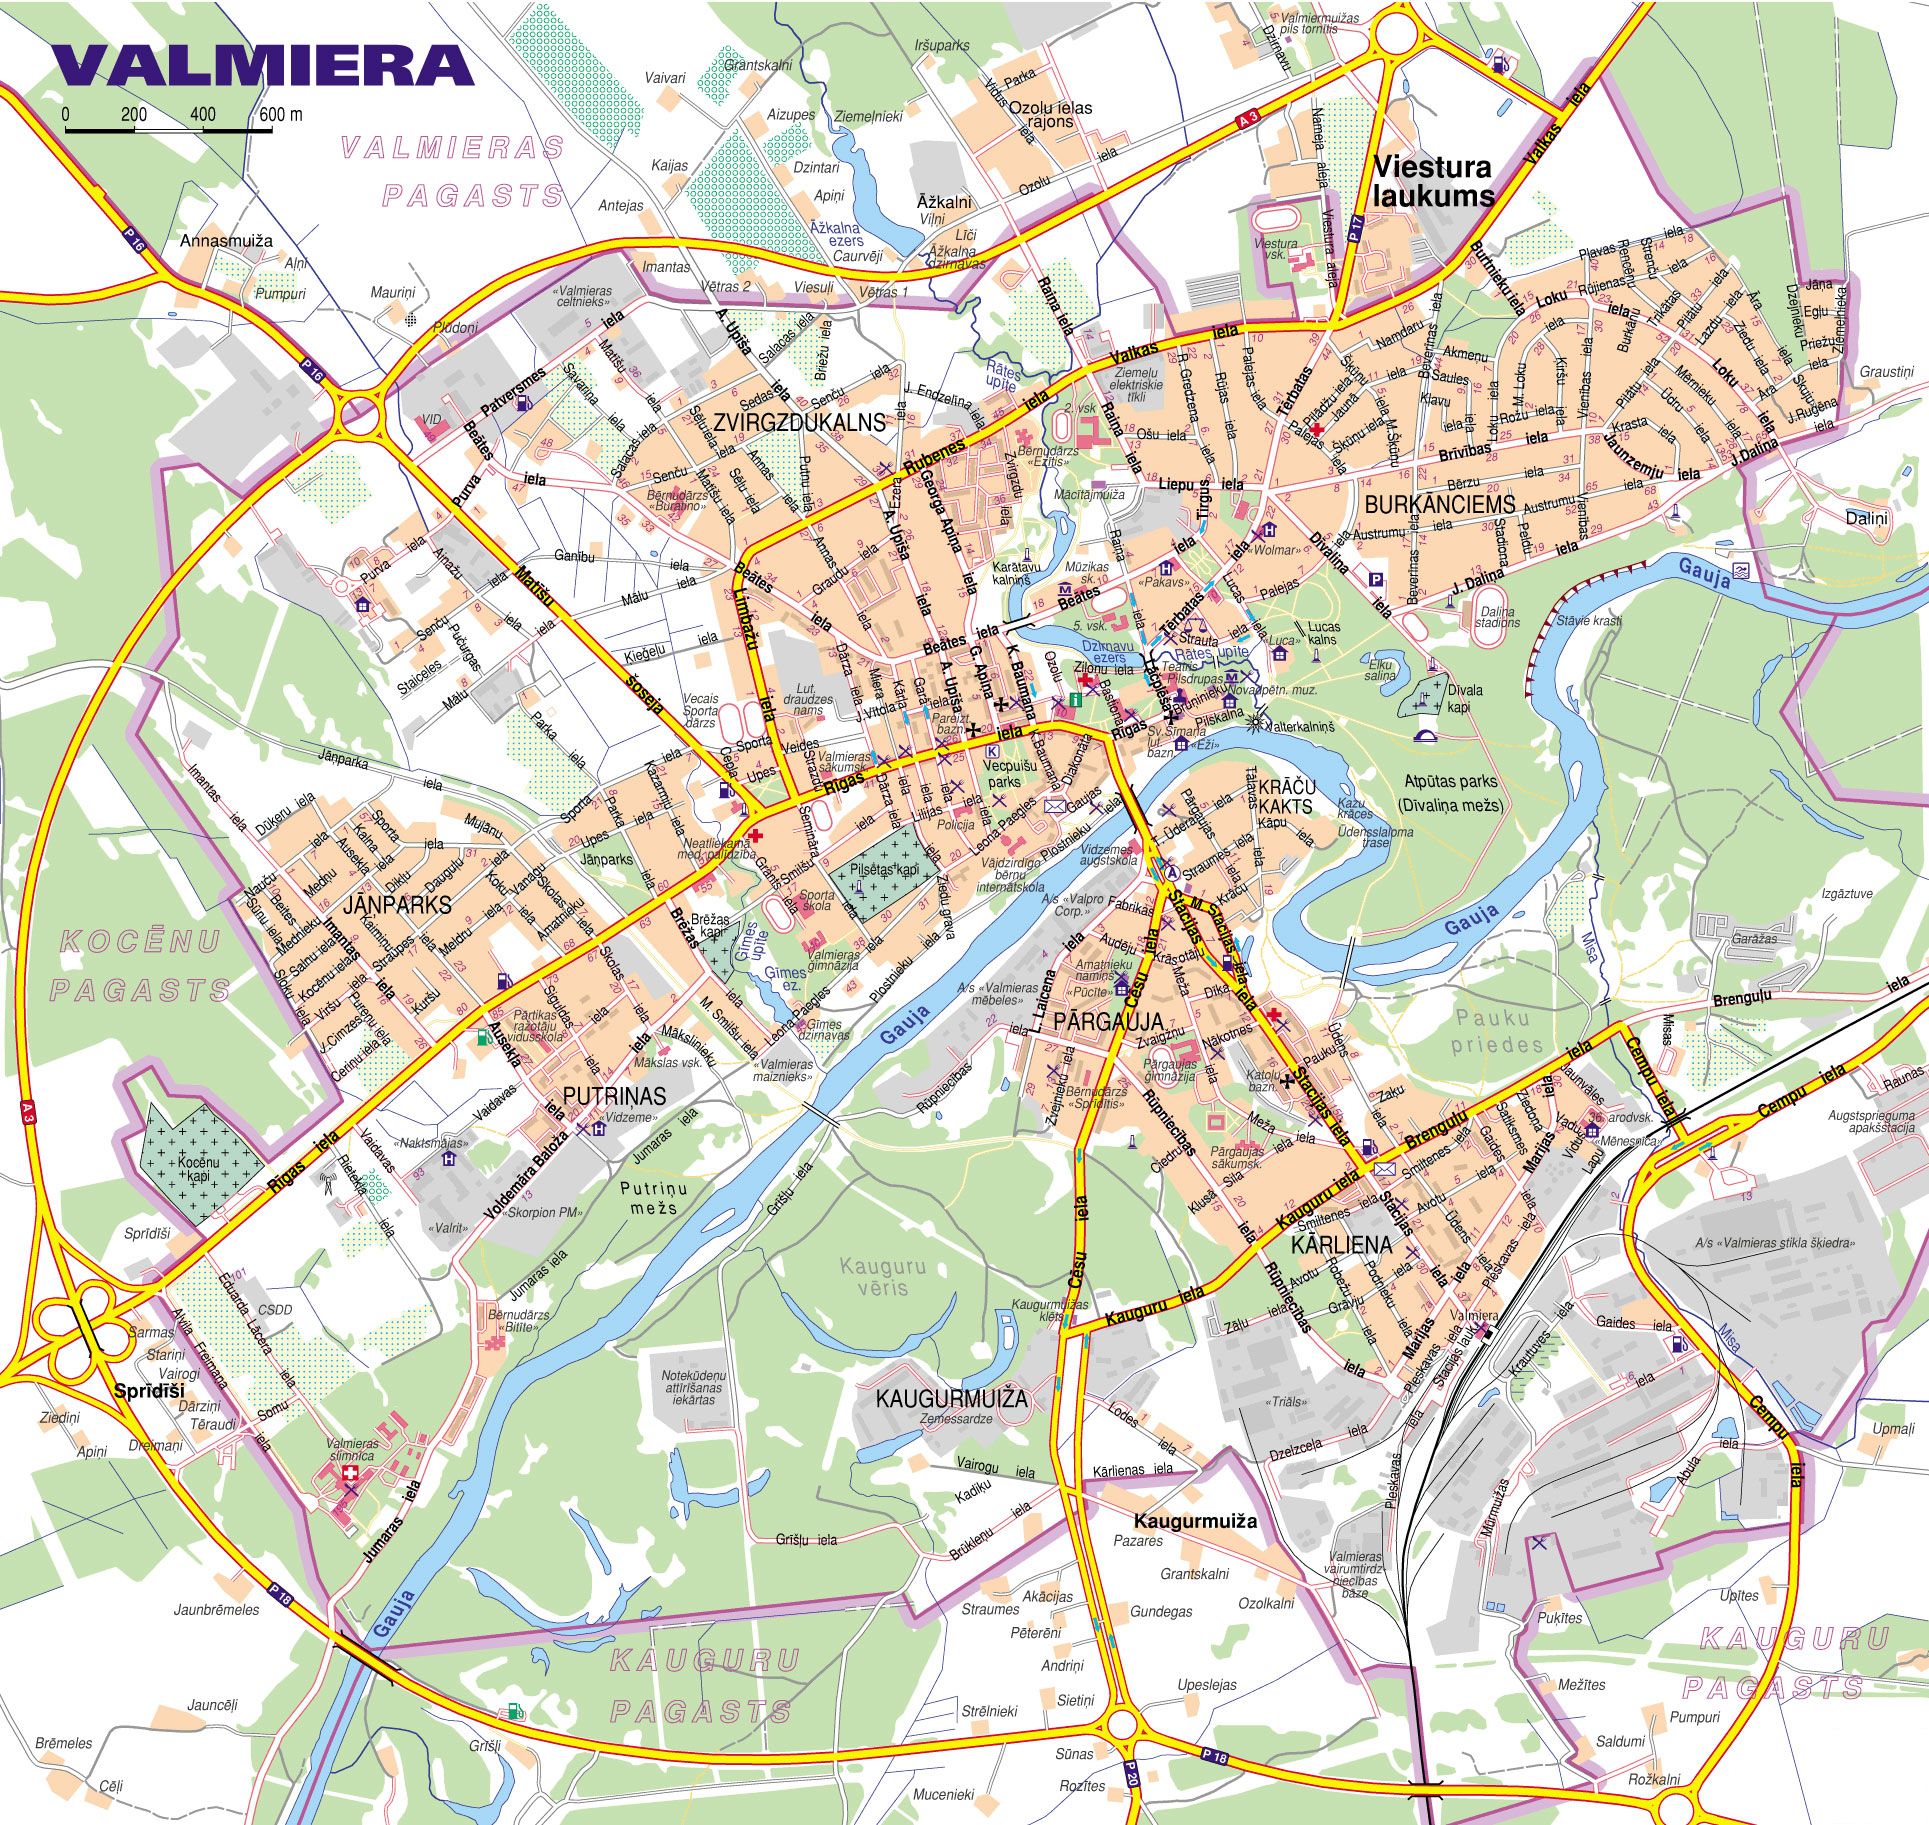 Map of Valmiera